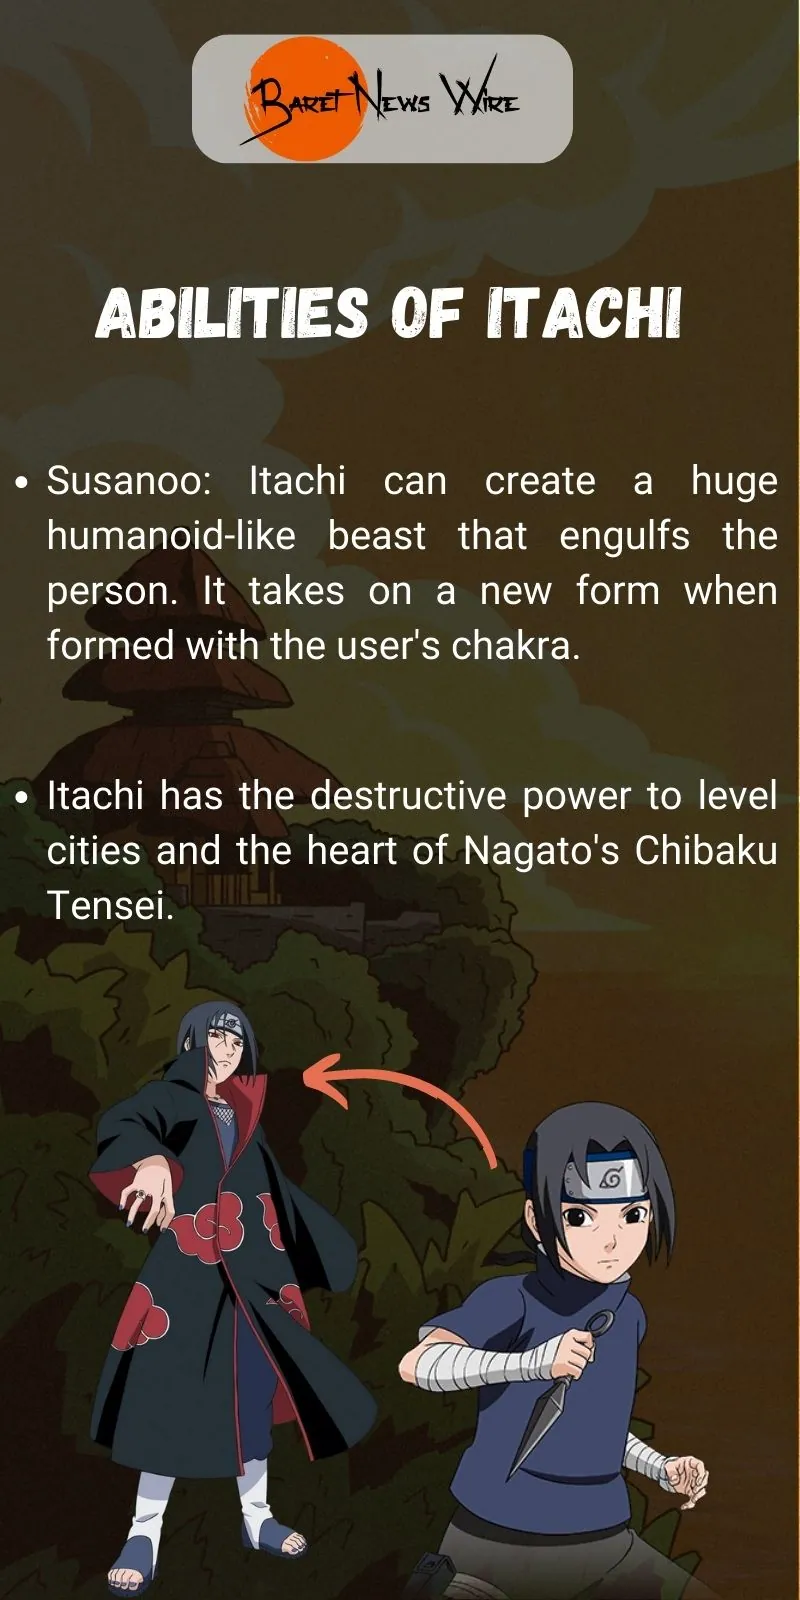 How Old Was Itachi When He Killed His Clan